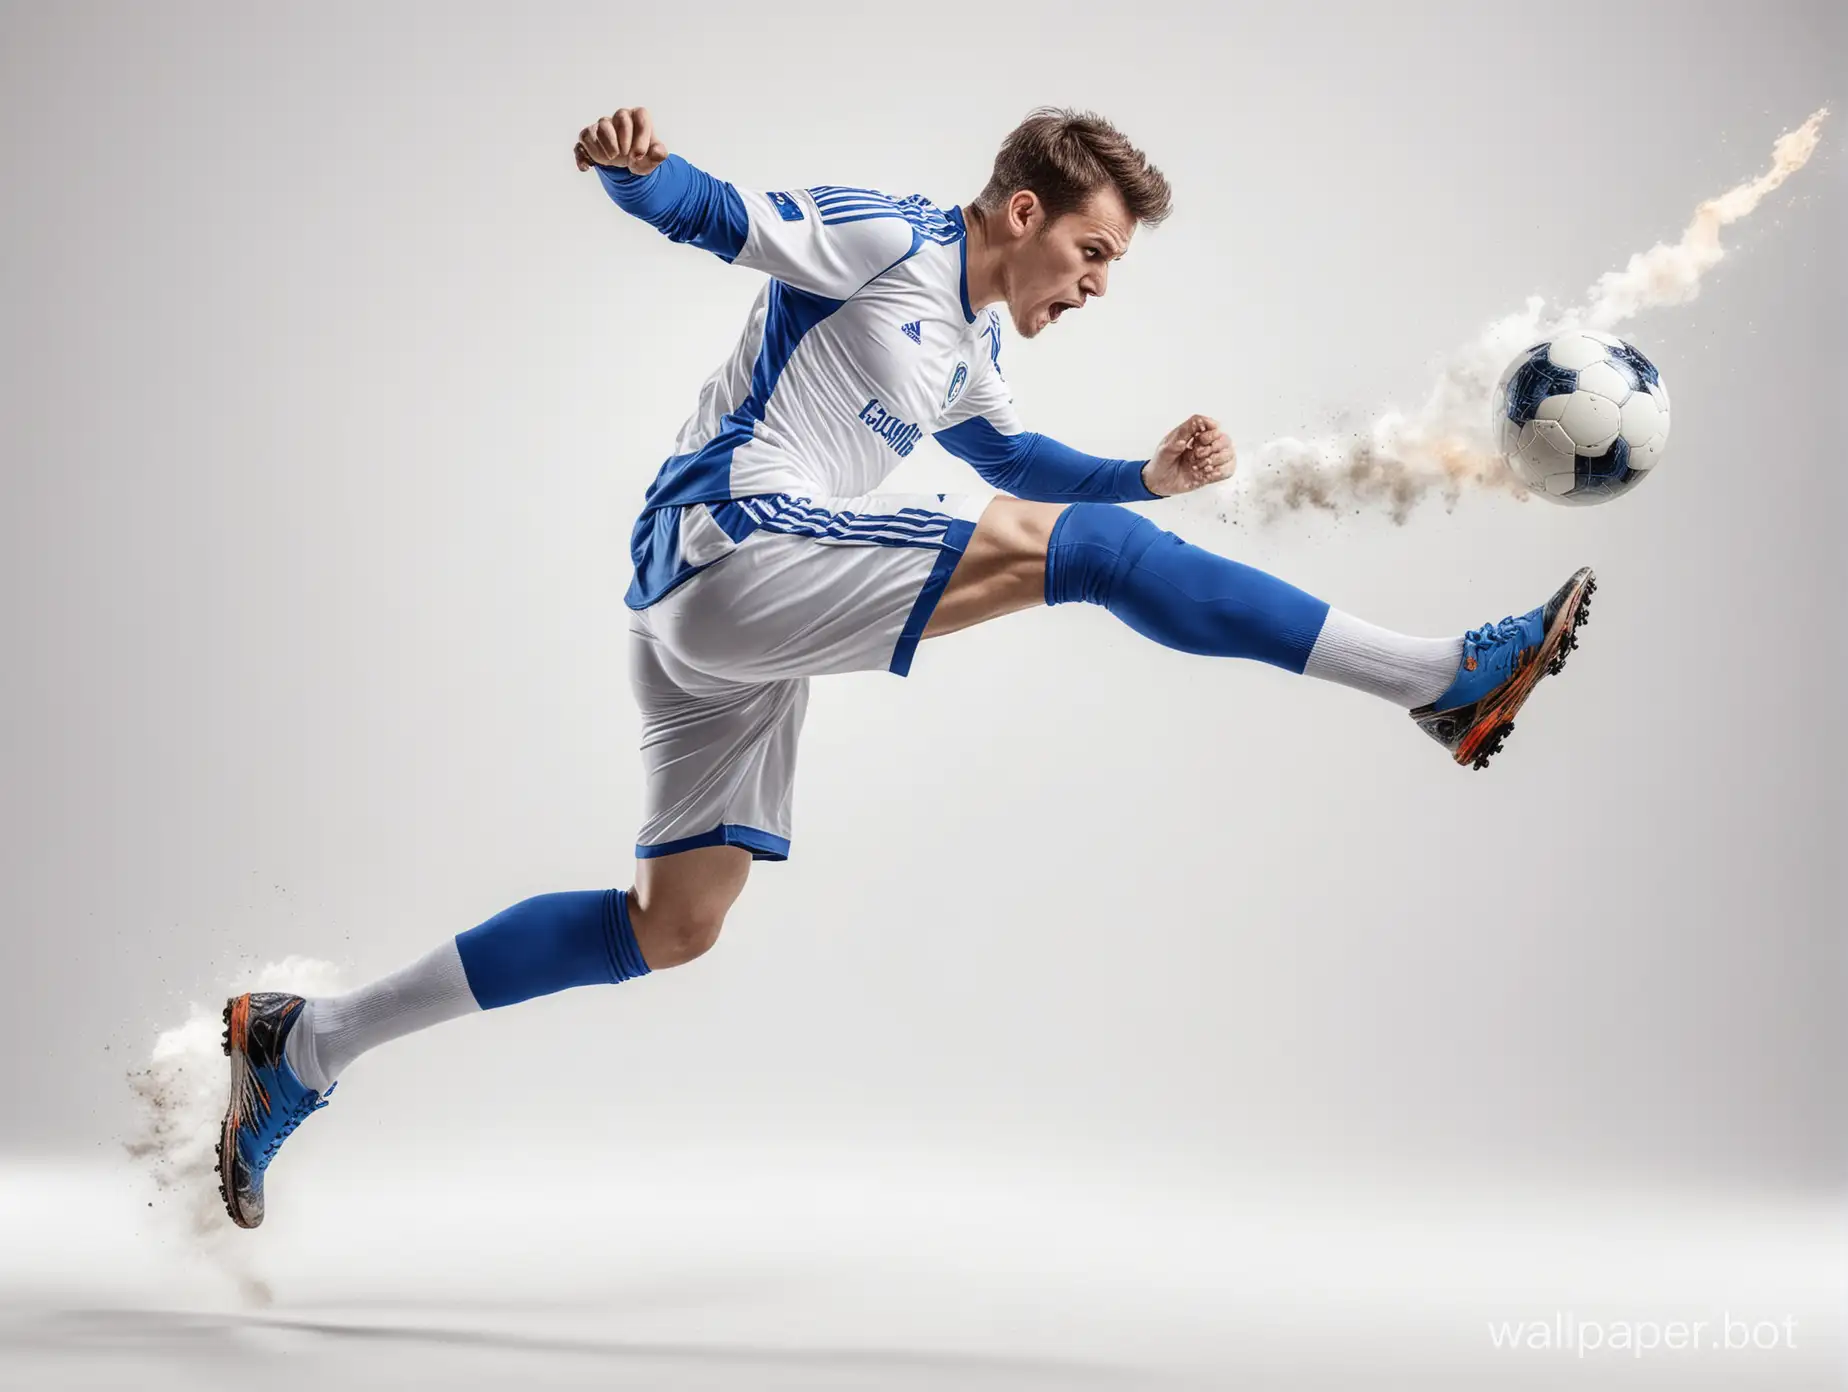 Dynamic-Soccer-Player-in-White-and-Blue-Uniform-with-Fire-Effect-on-UHDR-White-Background